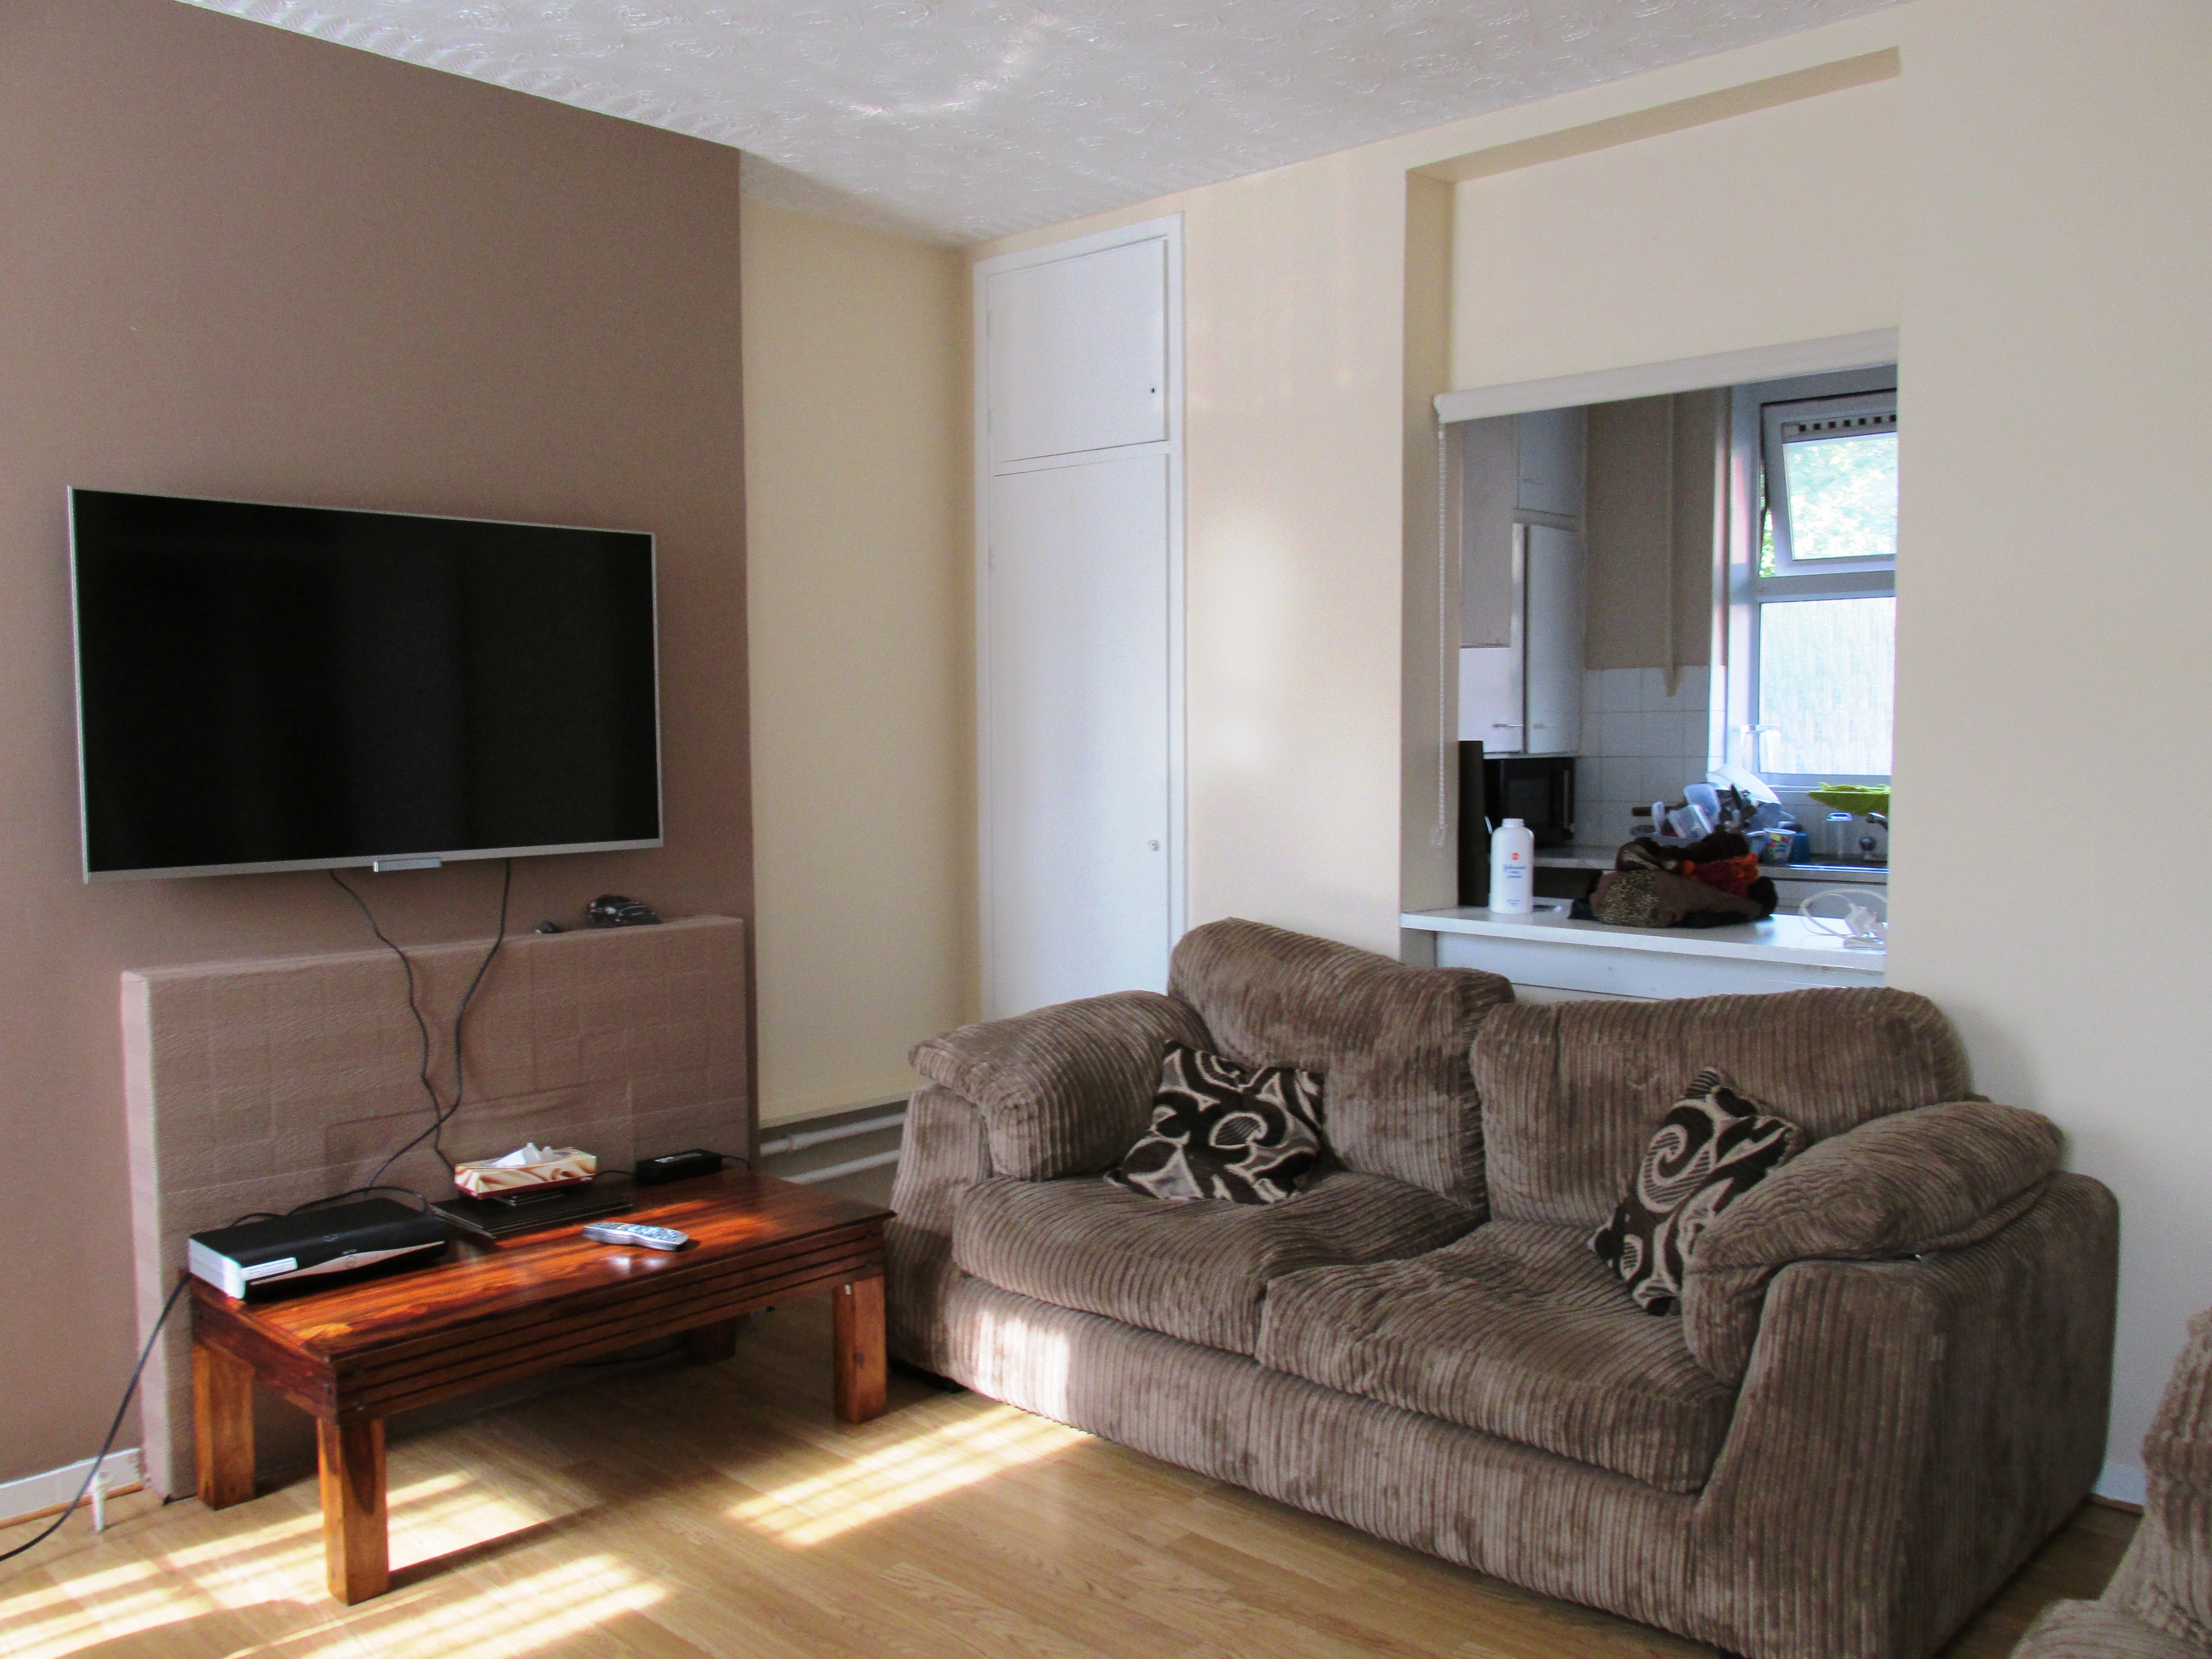 Well located 2bed flat with balcony and excellent transport links